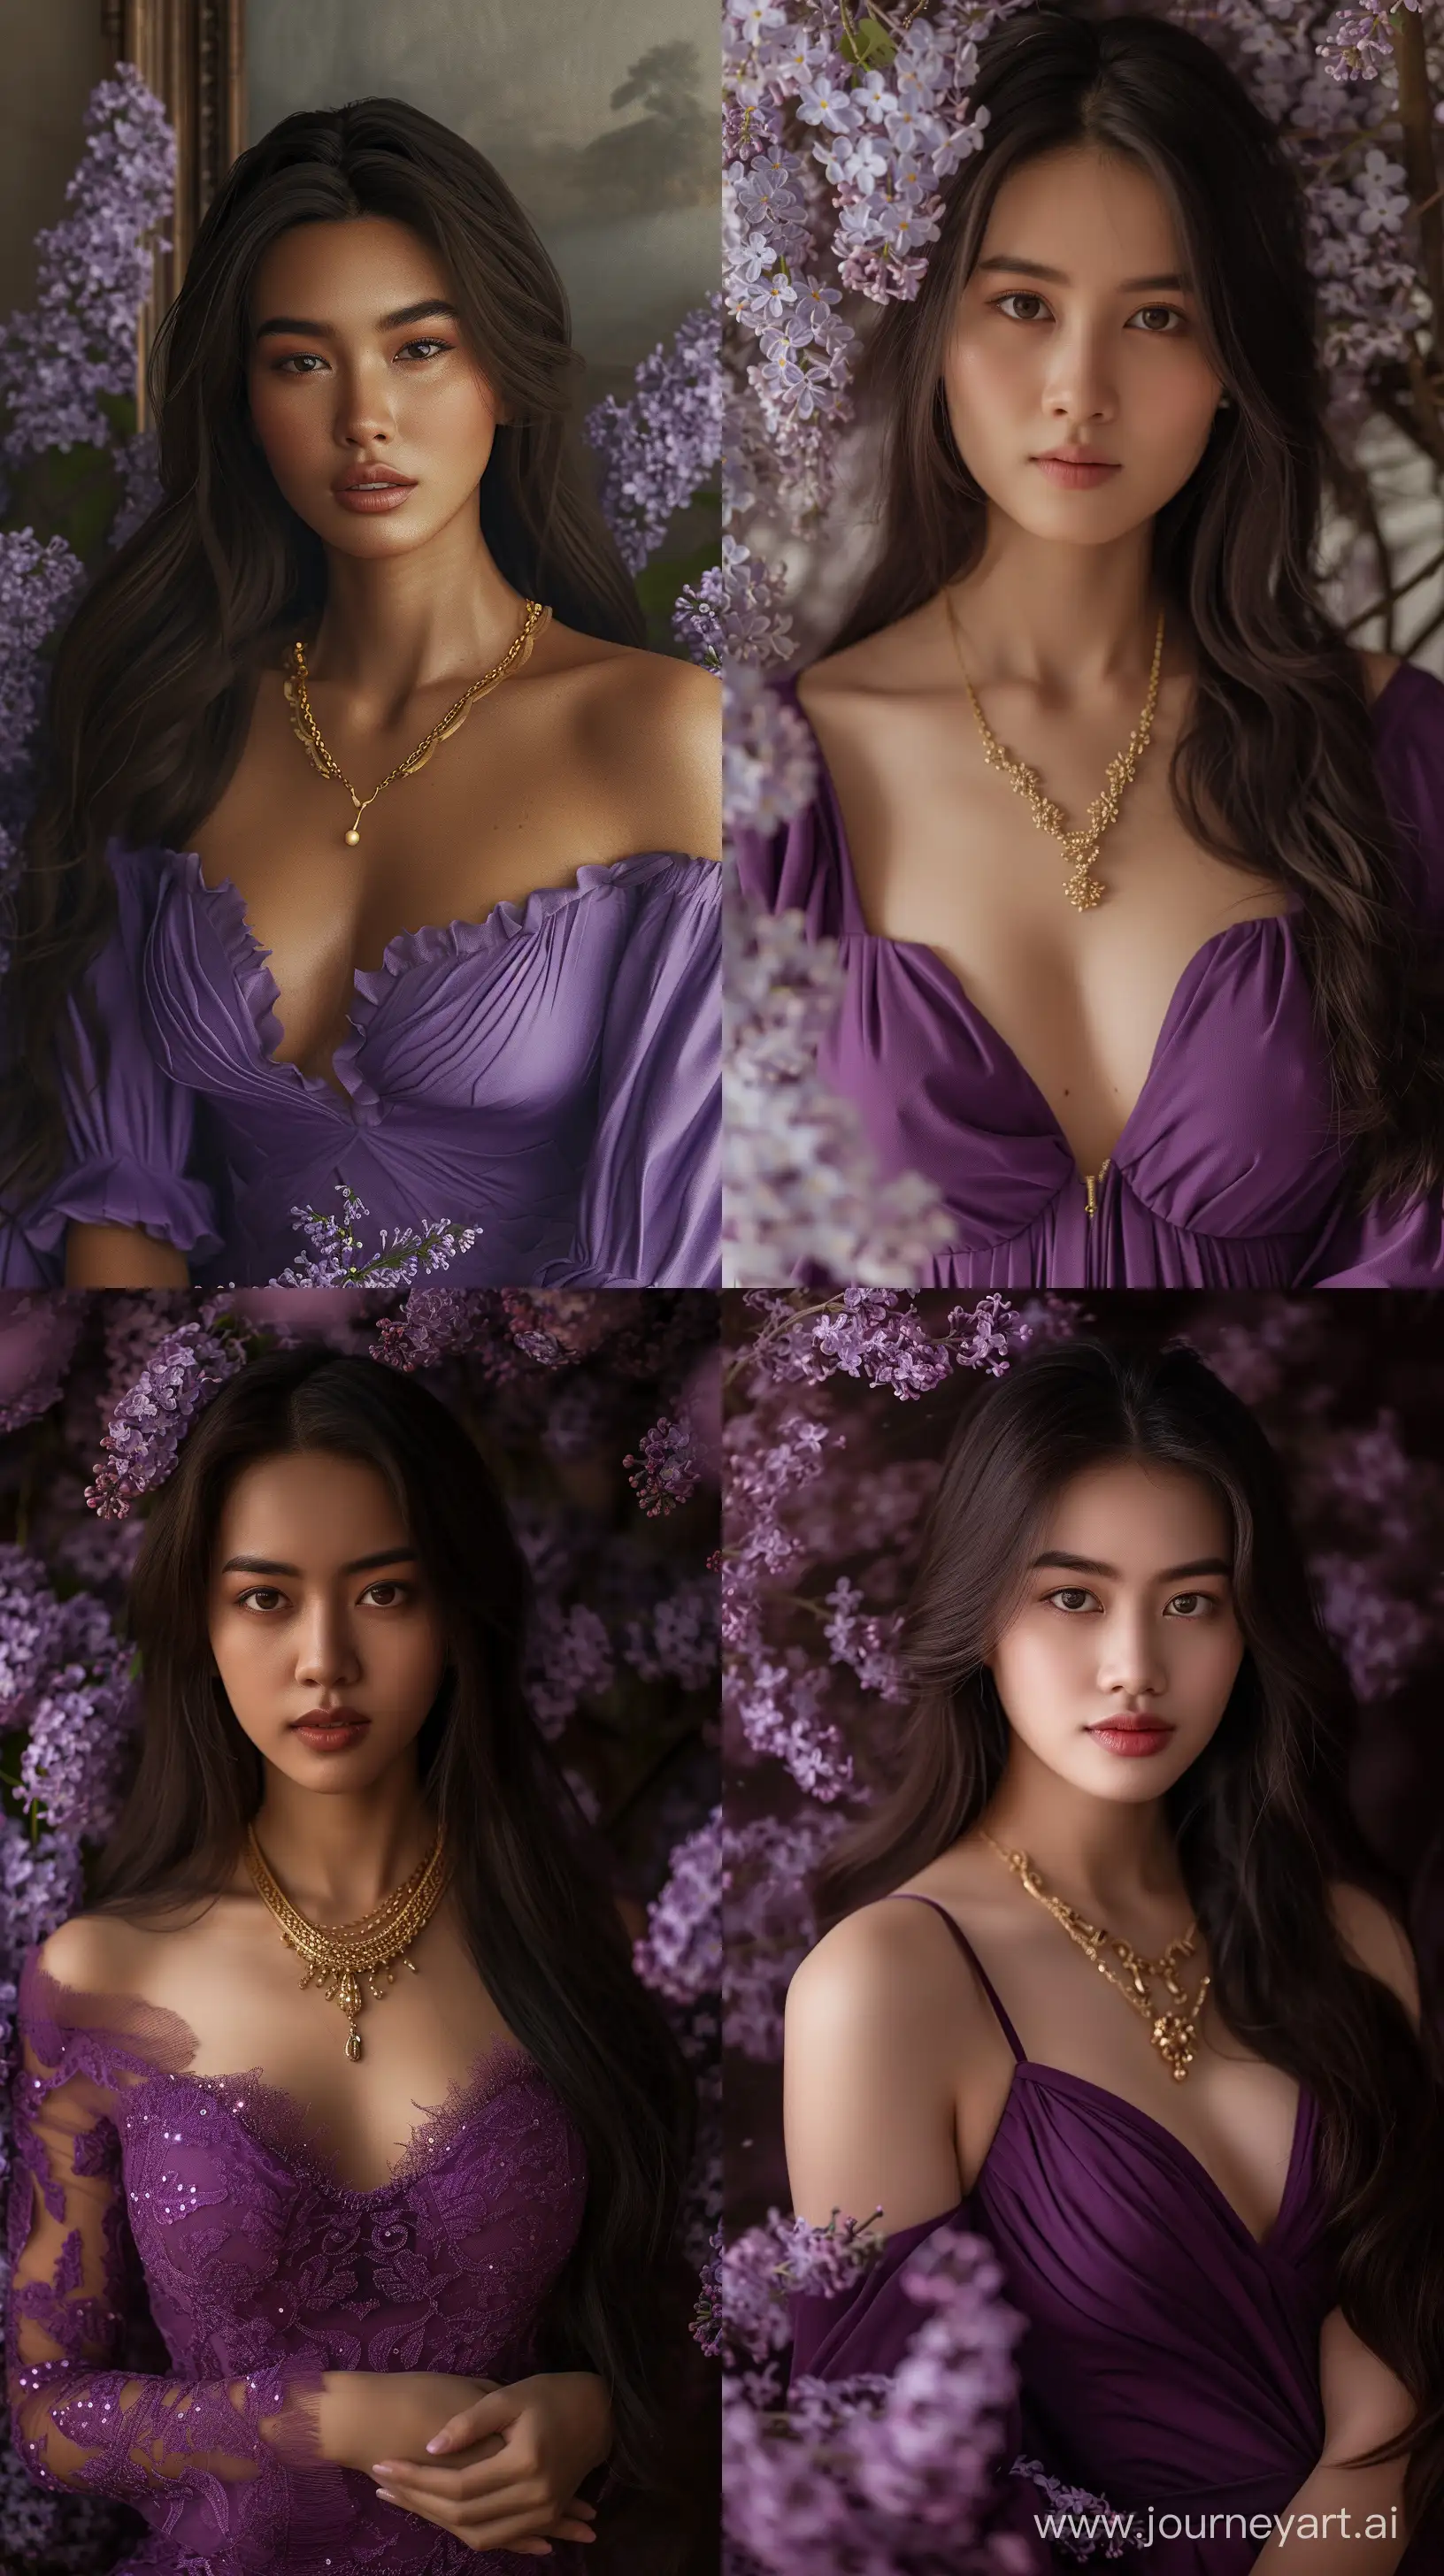 Stunning-Indonesian-Woman-in-Purple-Dress-Portrait-with-Lilac-Flowers